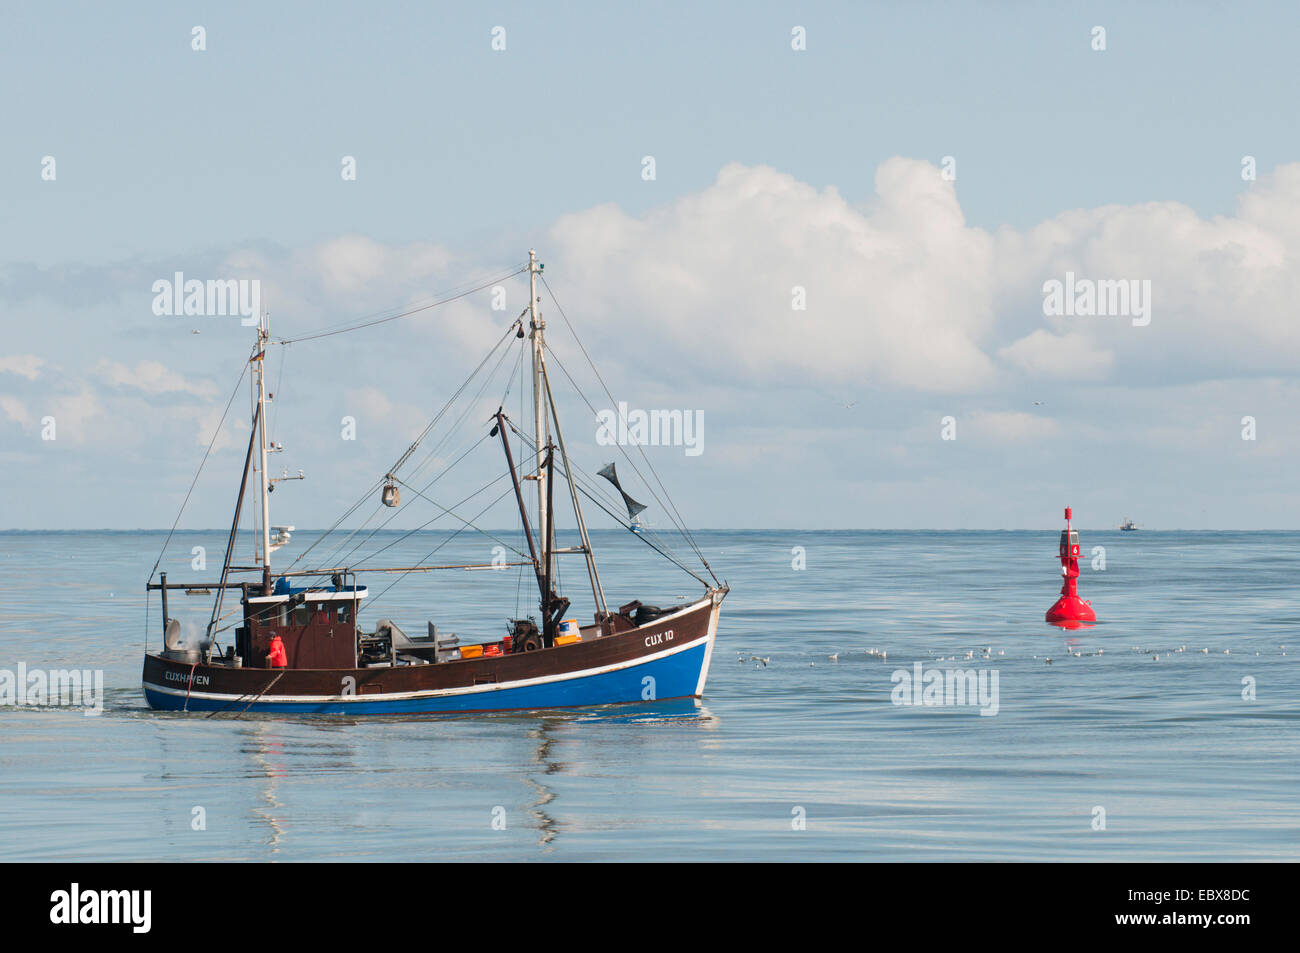 shrimp cutter fishing in the North Sea, Germany, Schleswig-Holstein Stock Photo